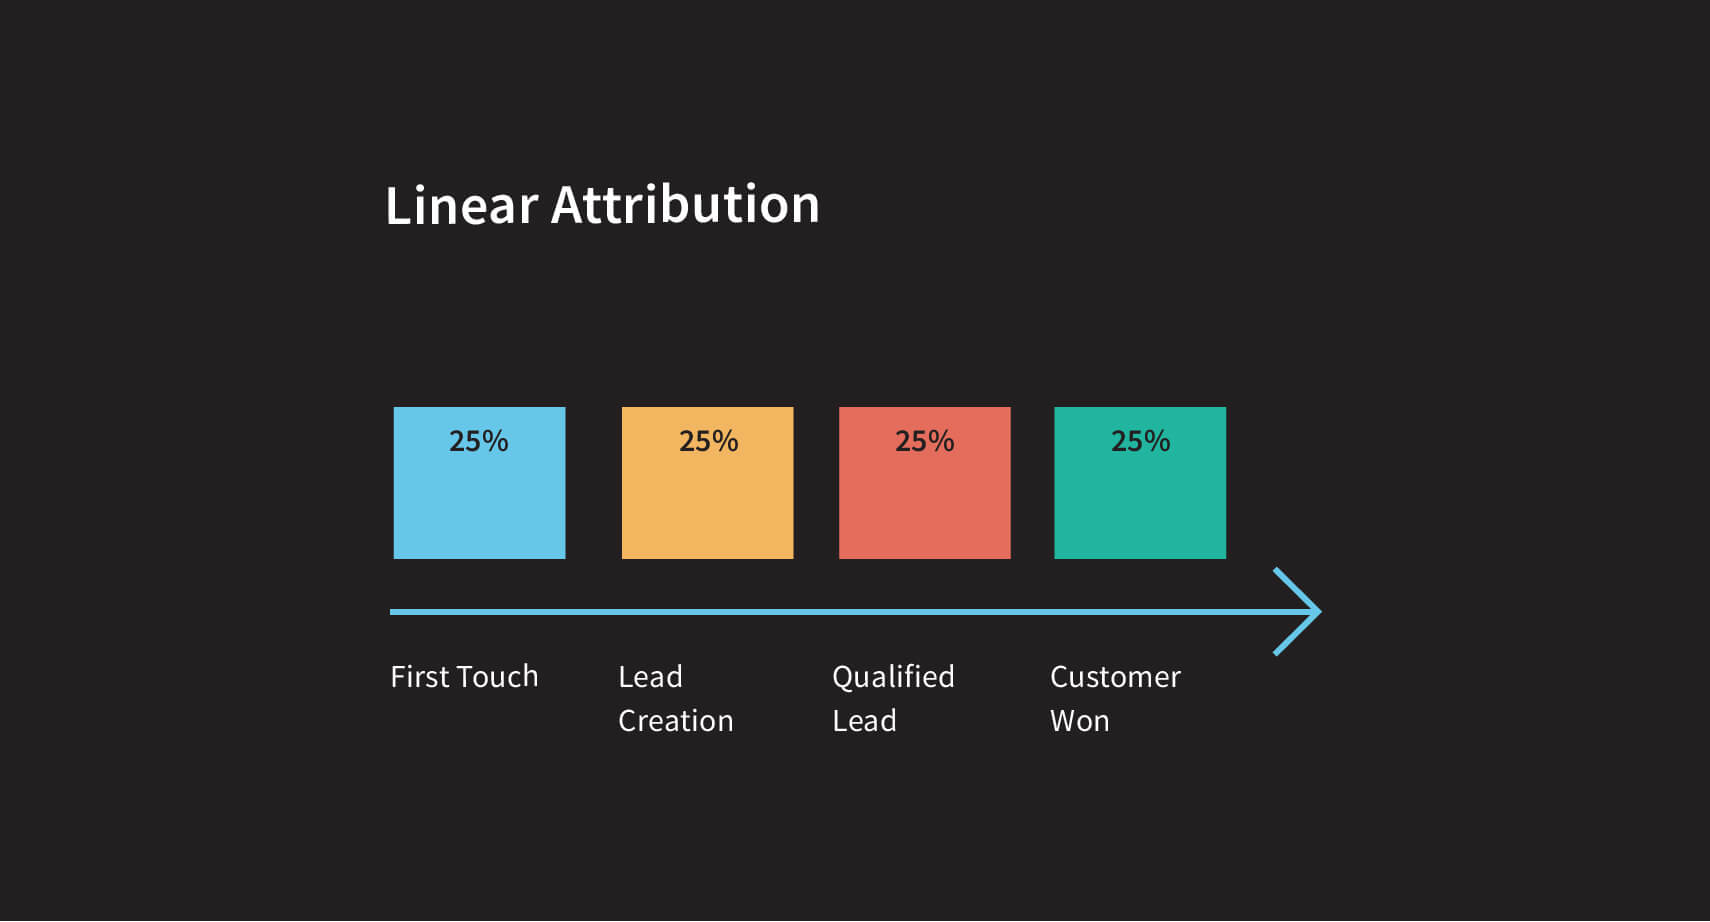 How the linear attribution model works